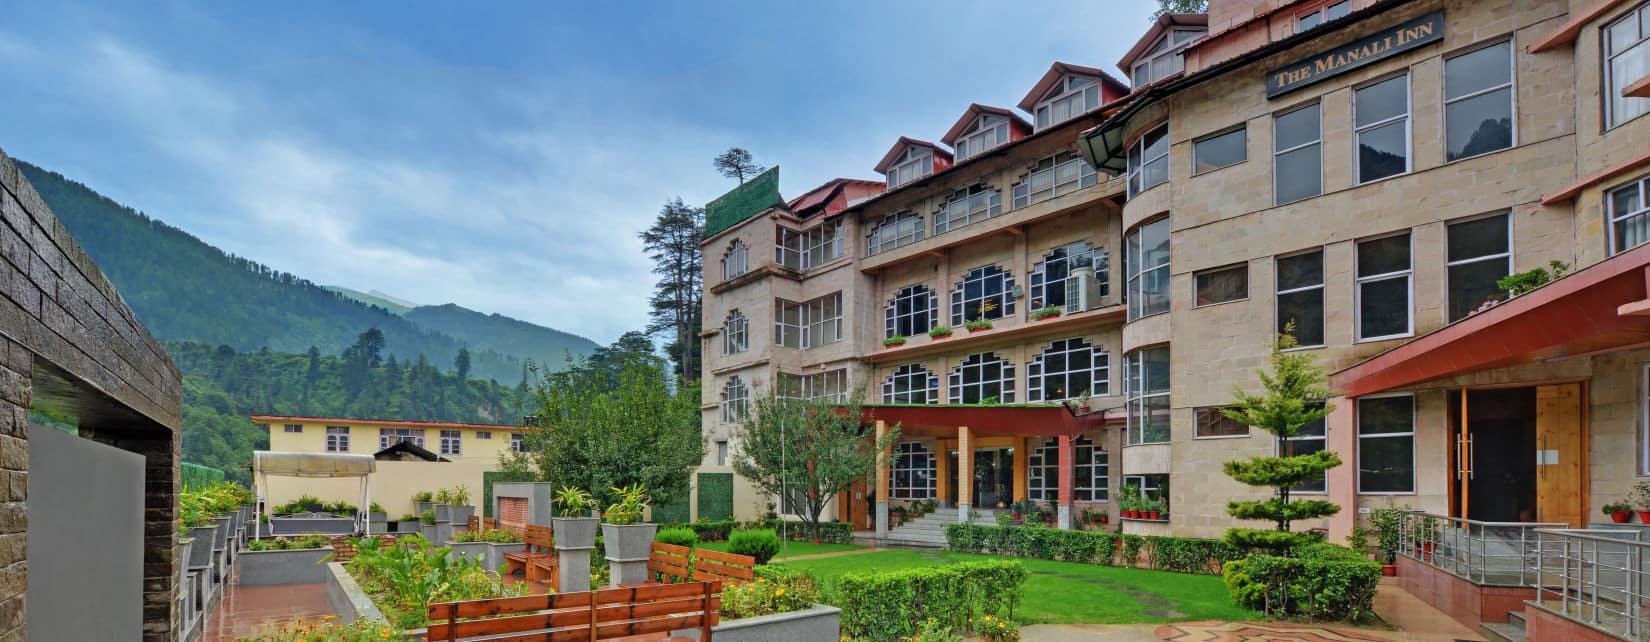 Manali Mall Road Hotels Booking Contact Number